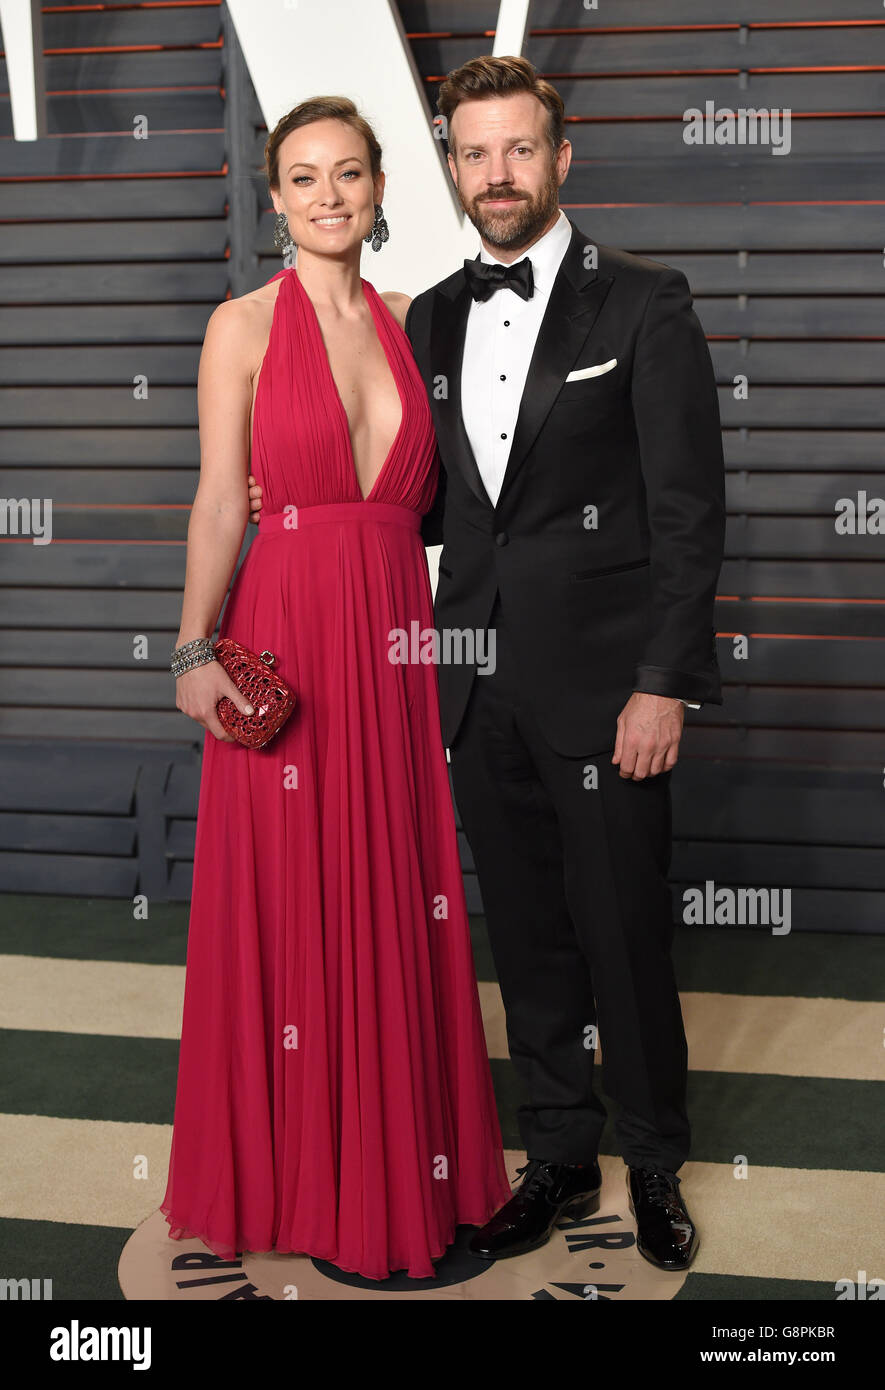 Olivia Wilde and Jason Sudeikis arrives at the Vanity Fair Oscar Party in  Beverly Hills, Los Angeles, CA, USA, February 28, 2016. PRESS ASSOCIATION  Photo. Picture date: Sunday February 28, 2016. See